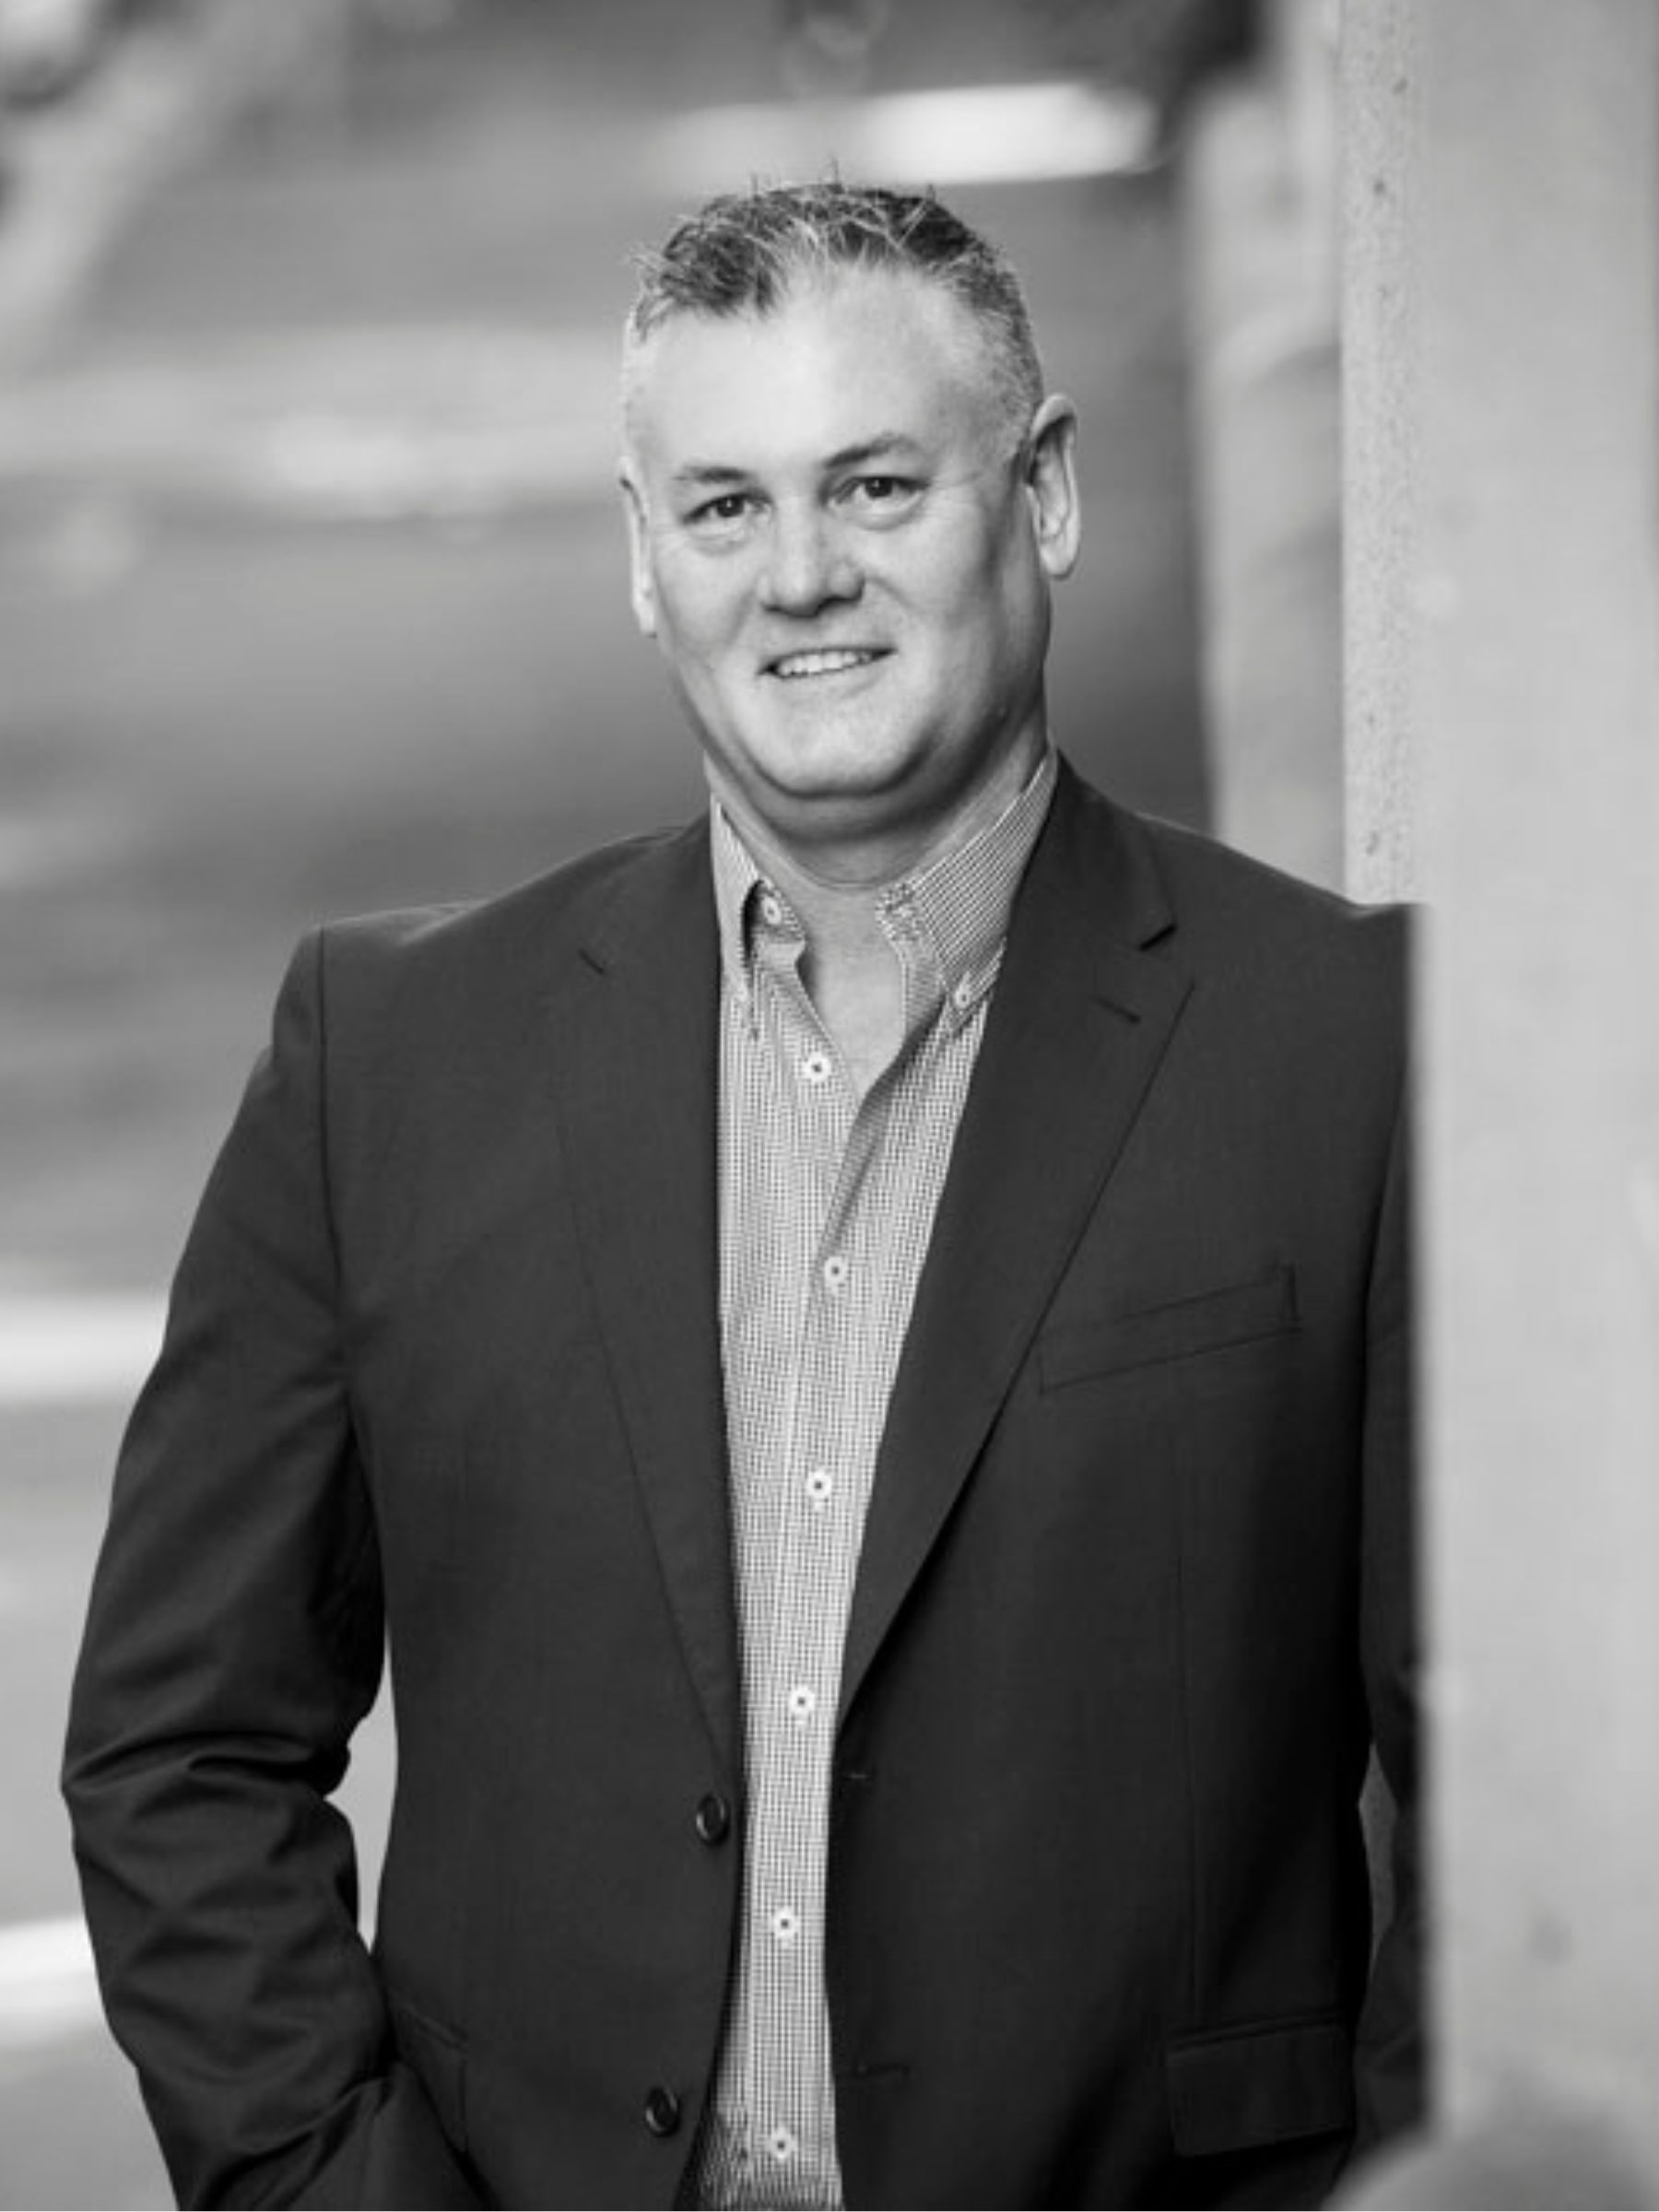 Image of Mark Rabone, CDL Australia's Senior Development Manager, standing next to a concrete wall in black and white.